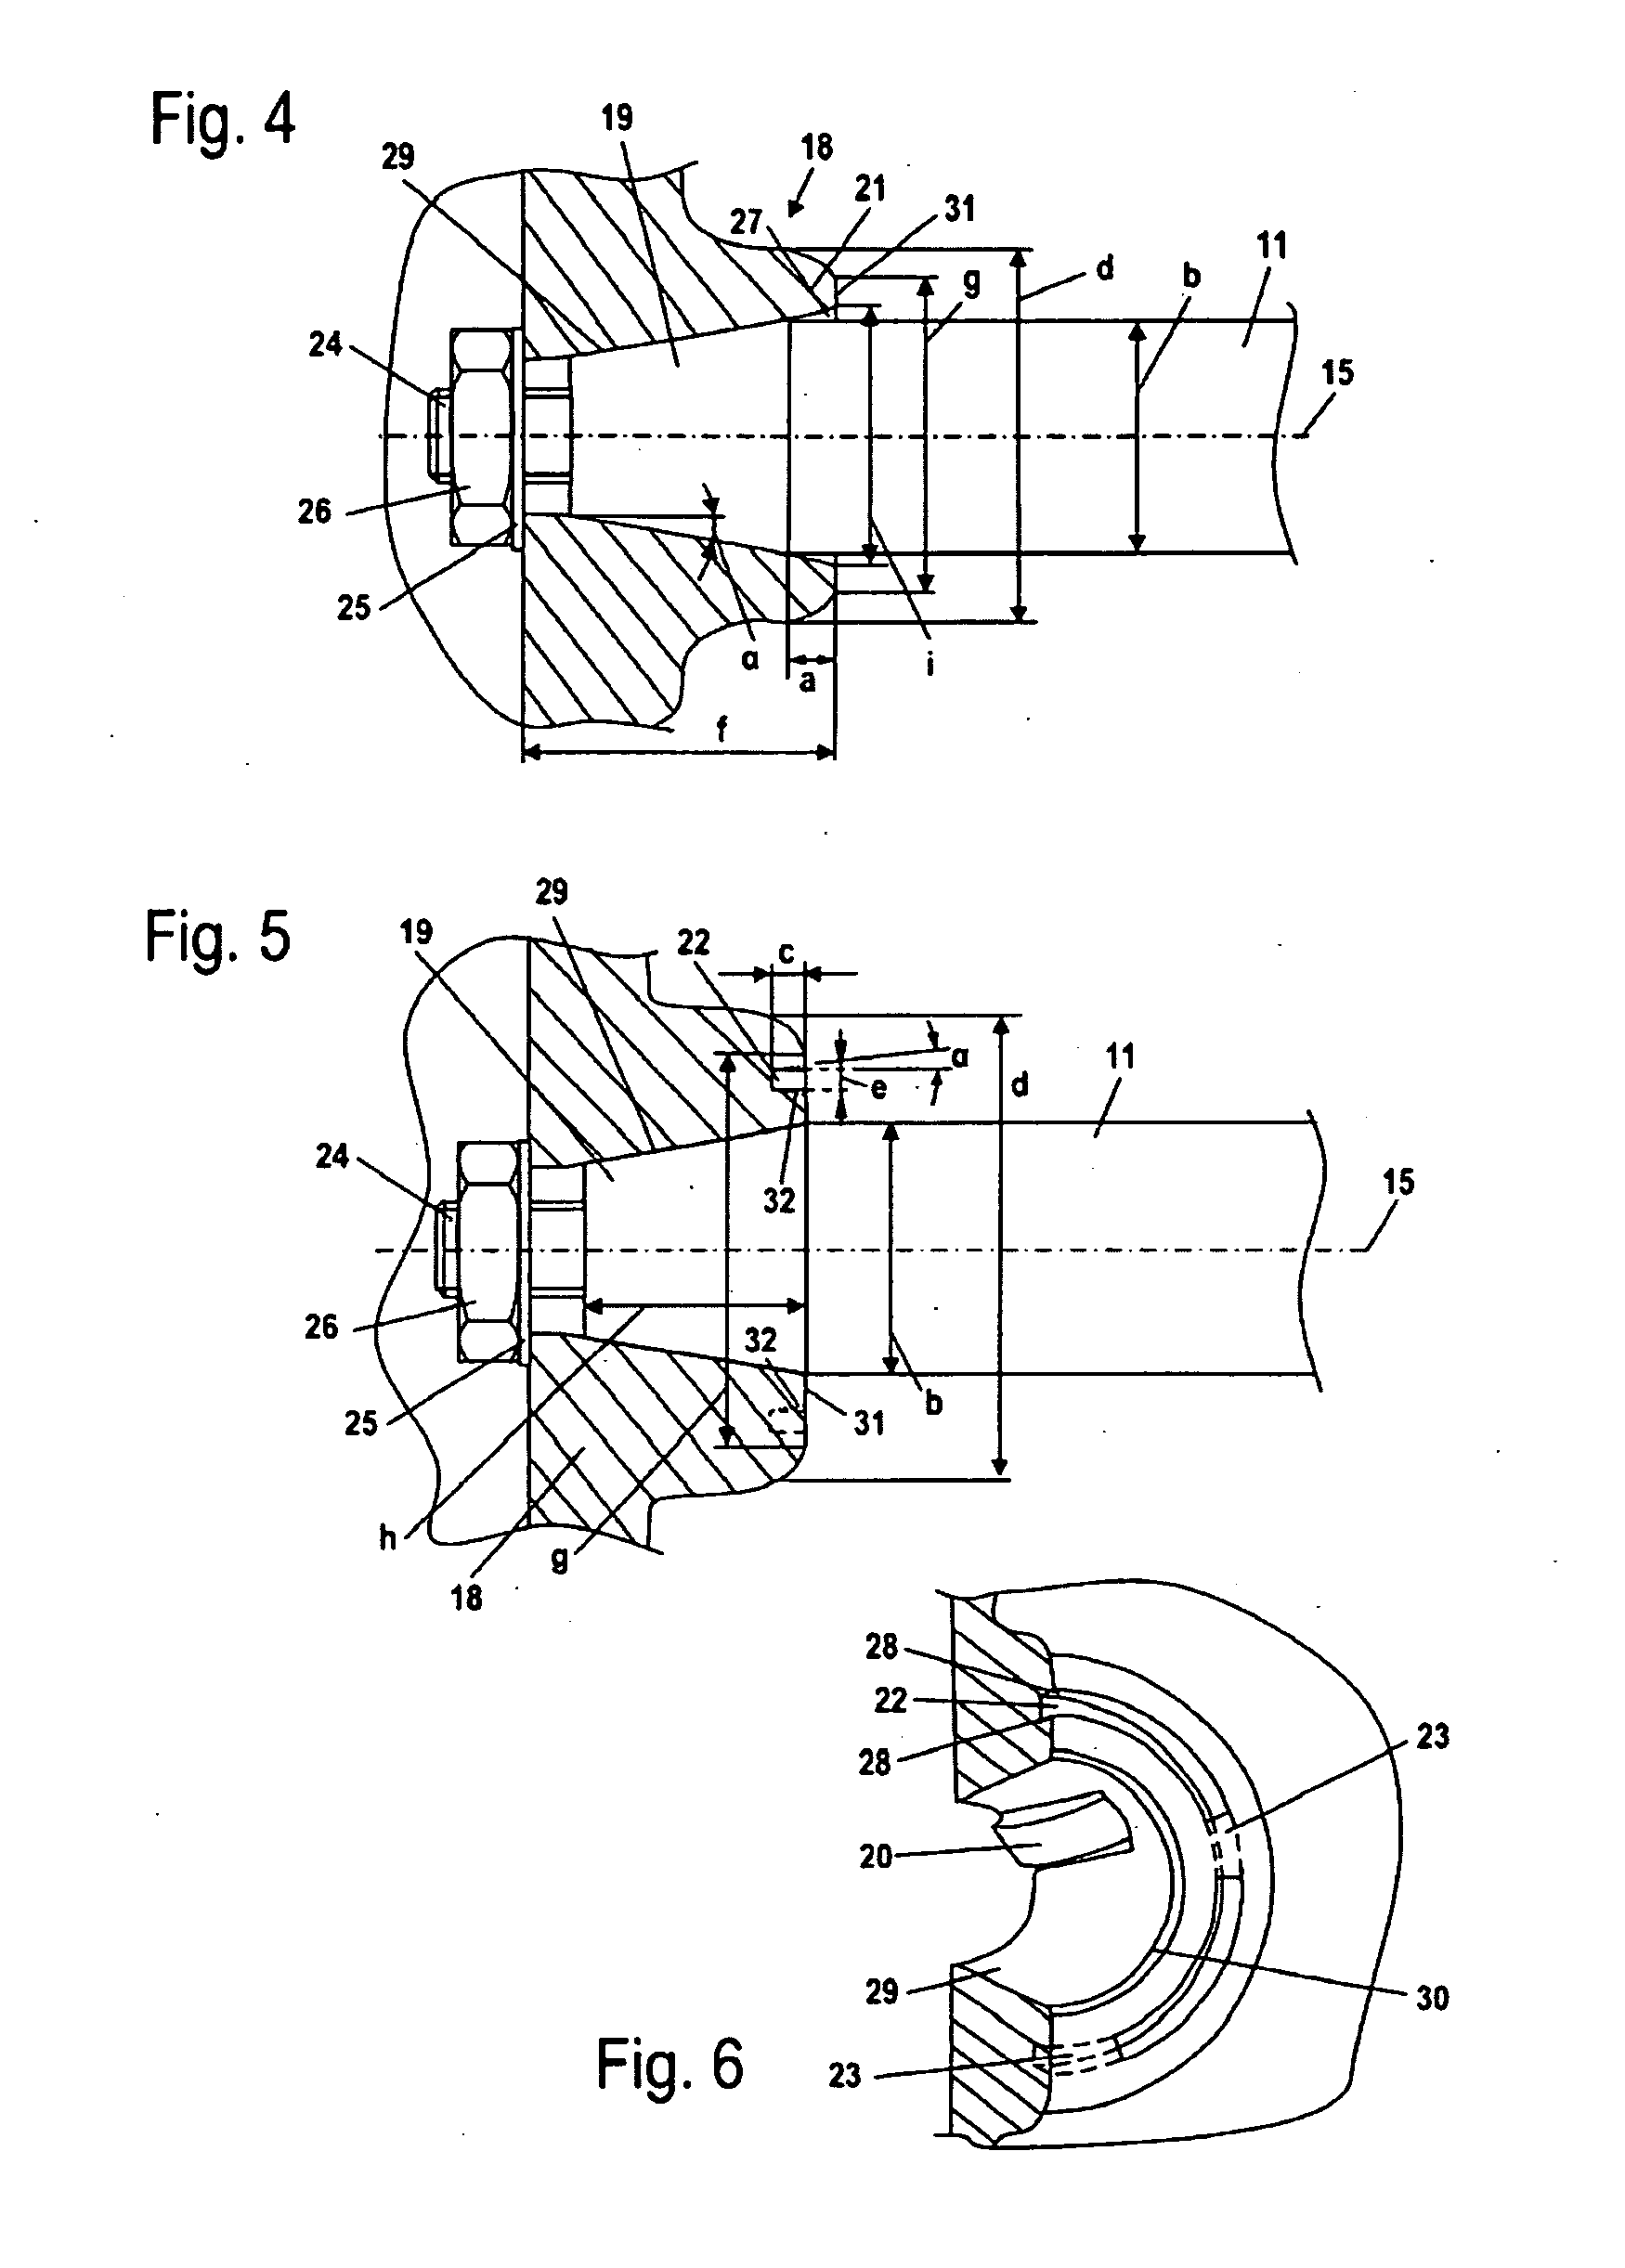 Shaft/hub connection and manually guided implement